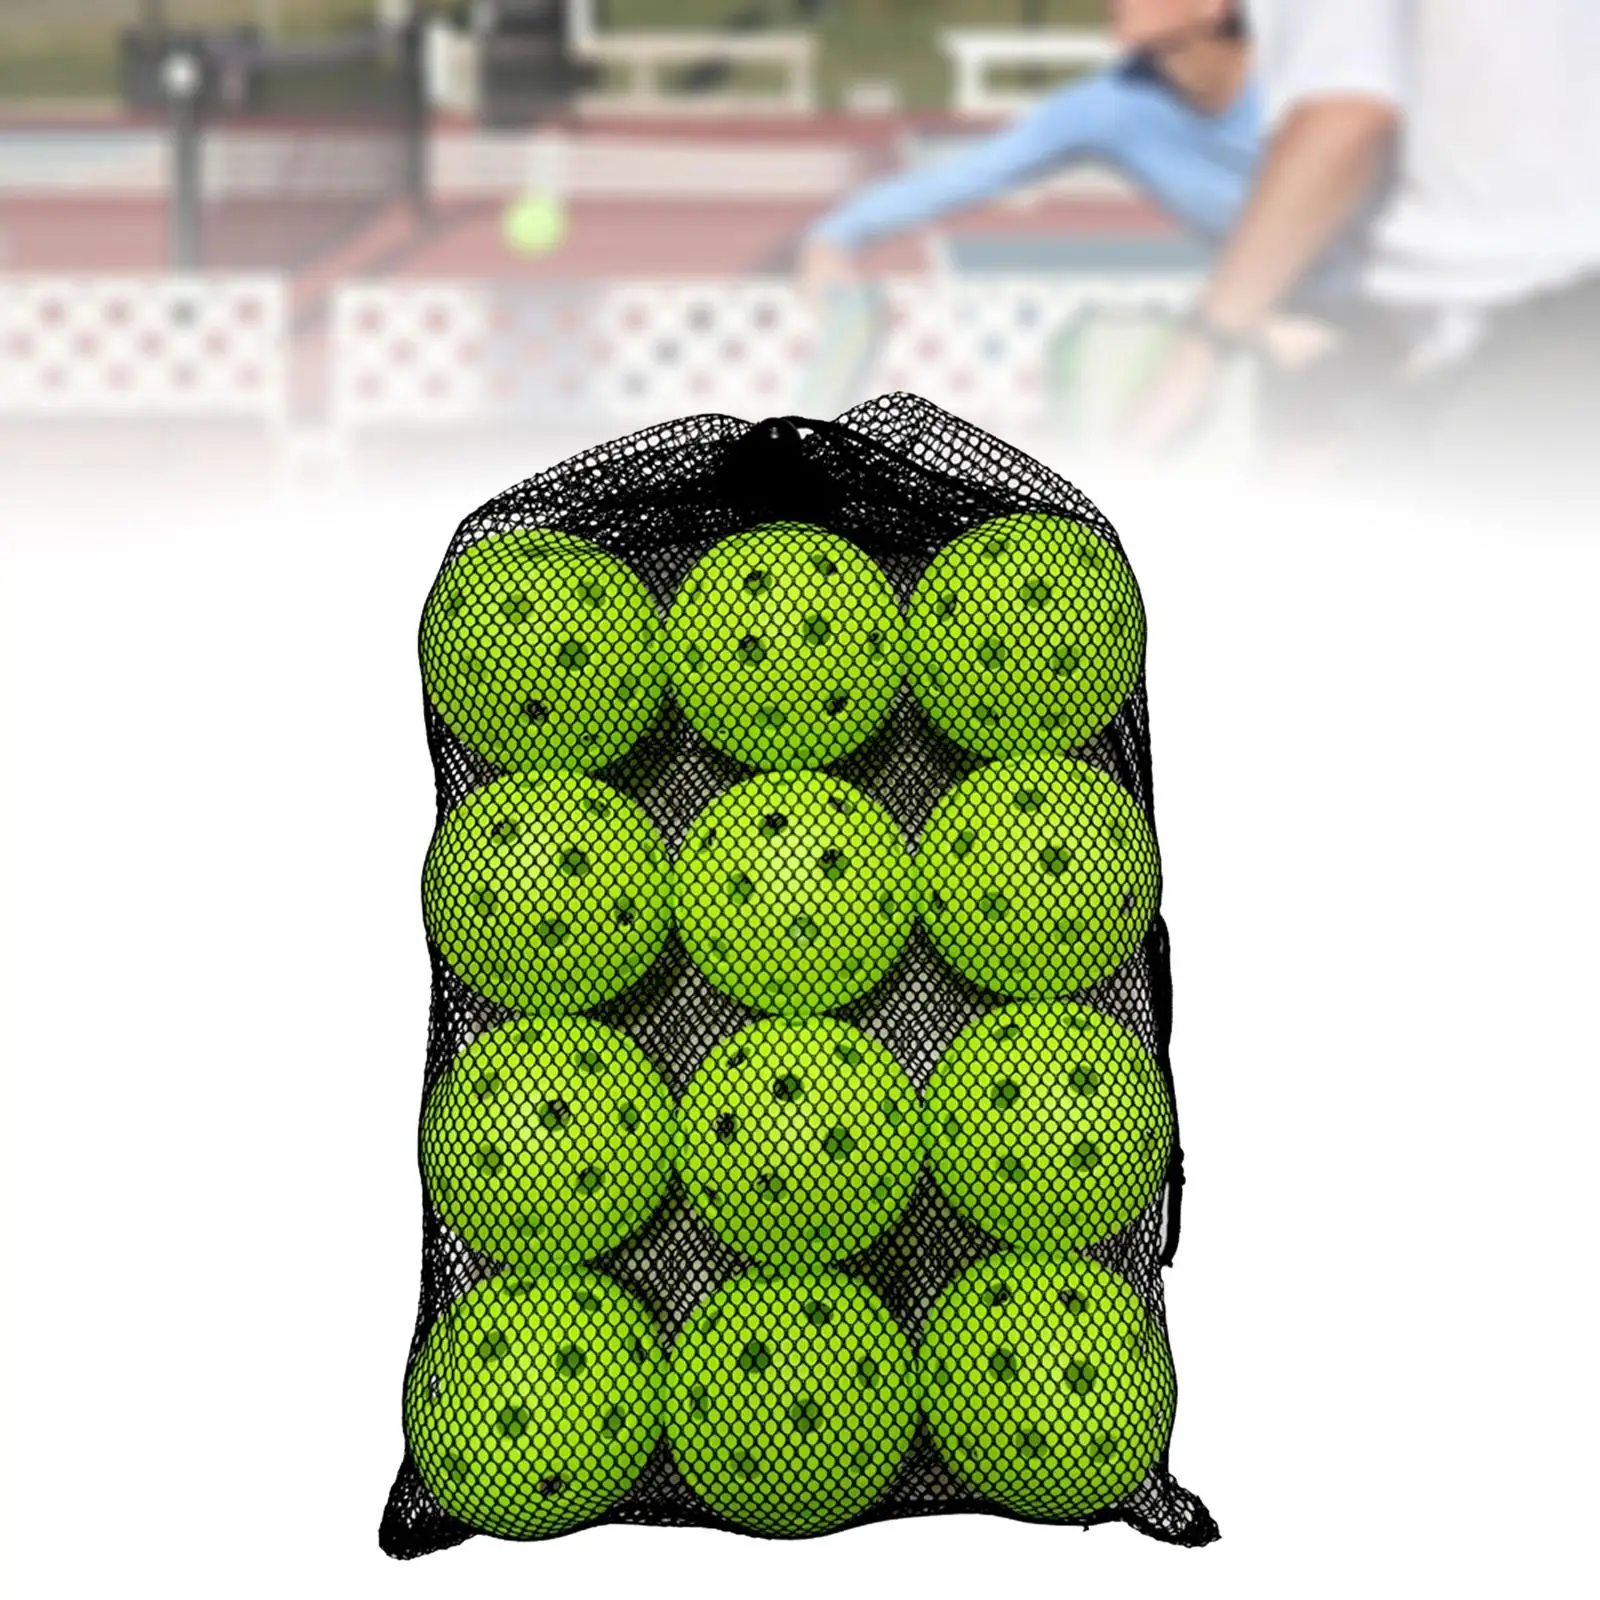 12 Pieces Pickleball Balls 74mm Fitments for Indoor Outdoor Tournament Play